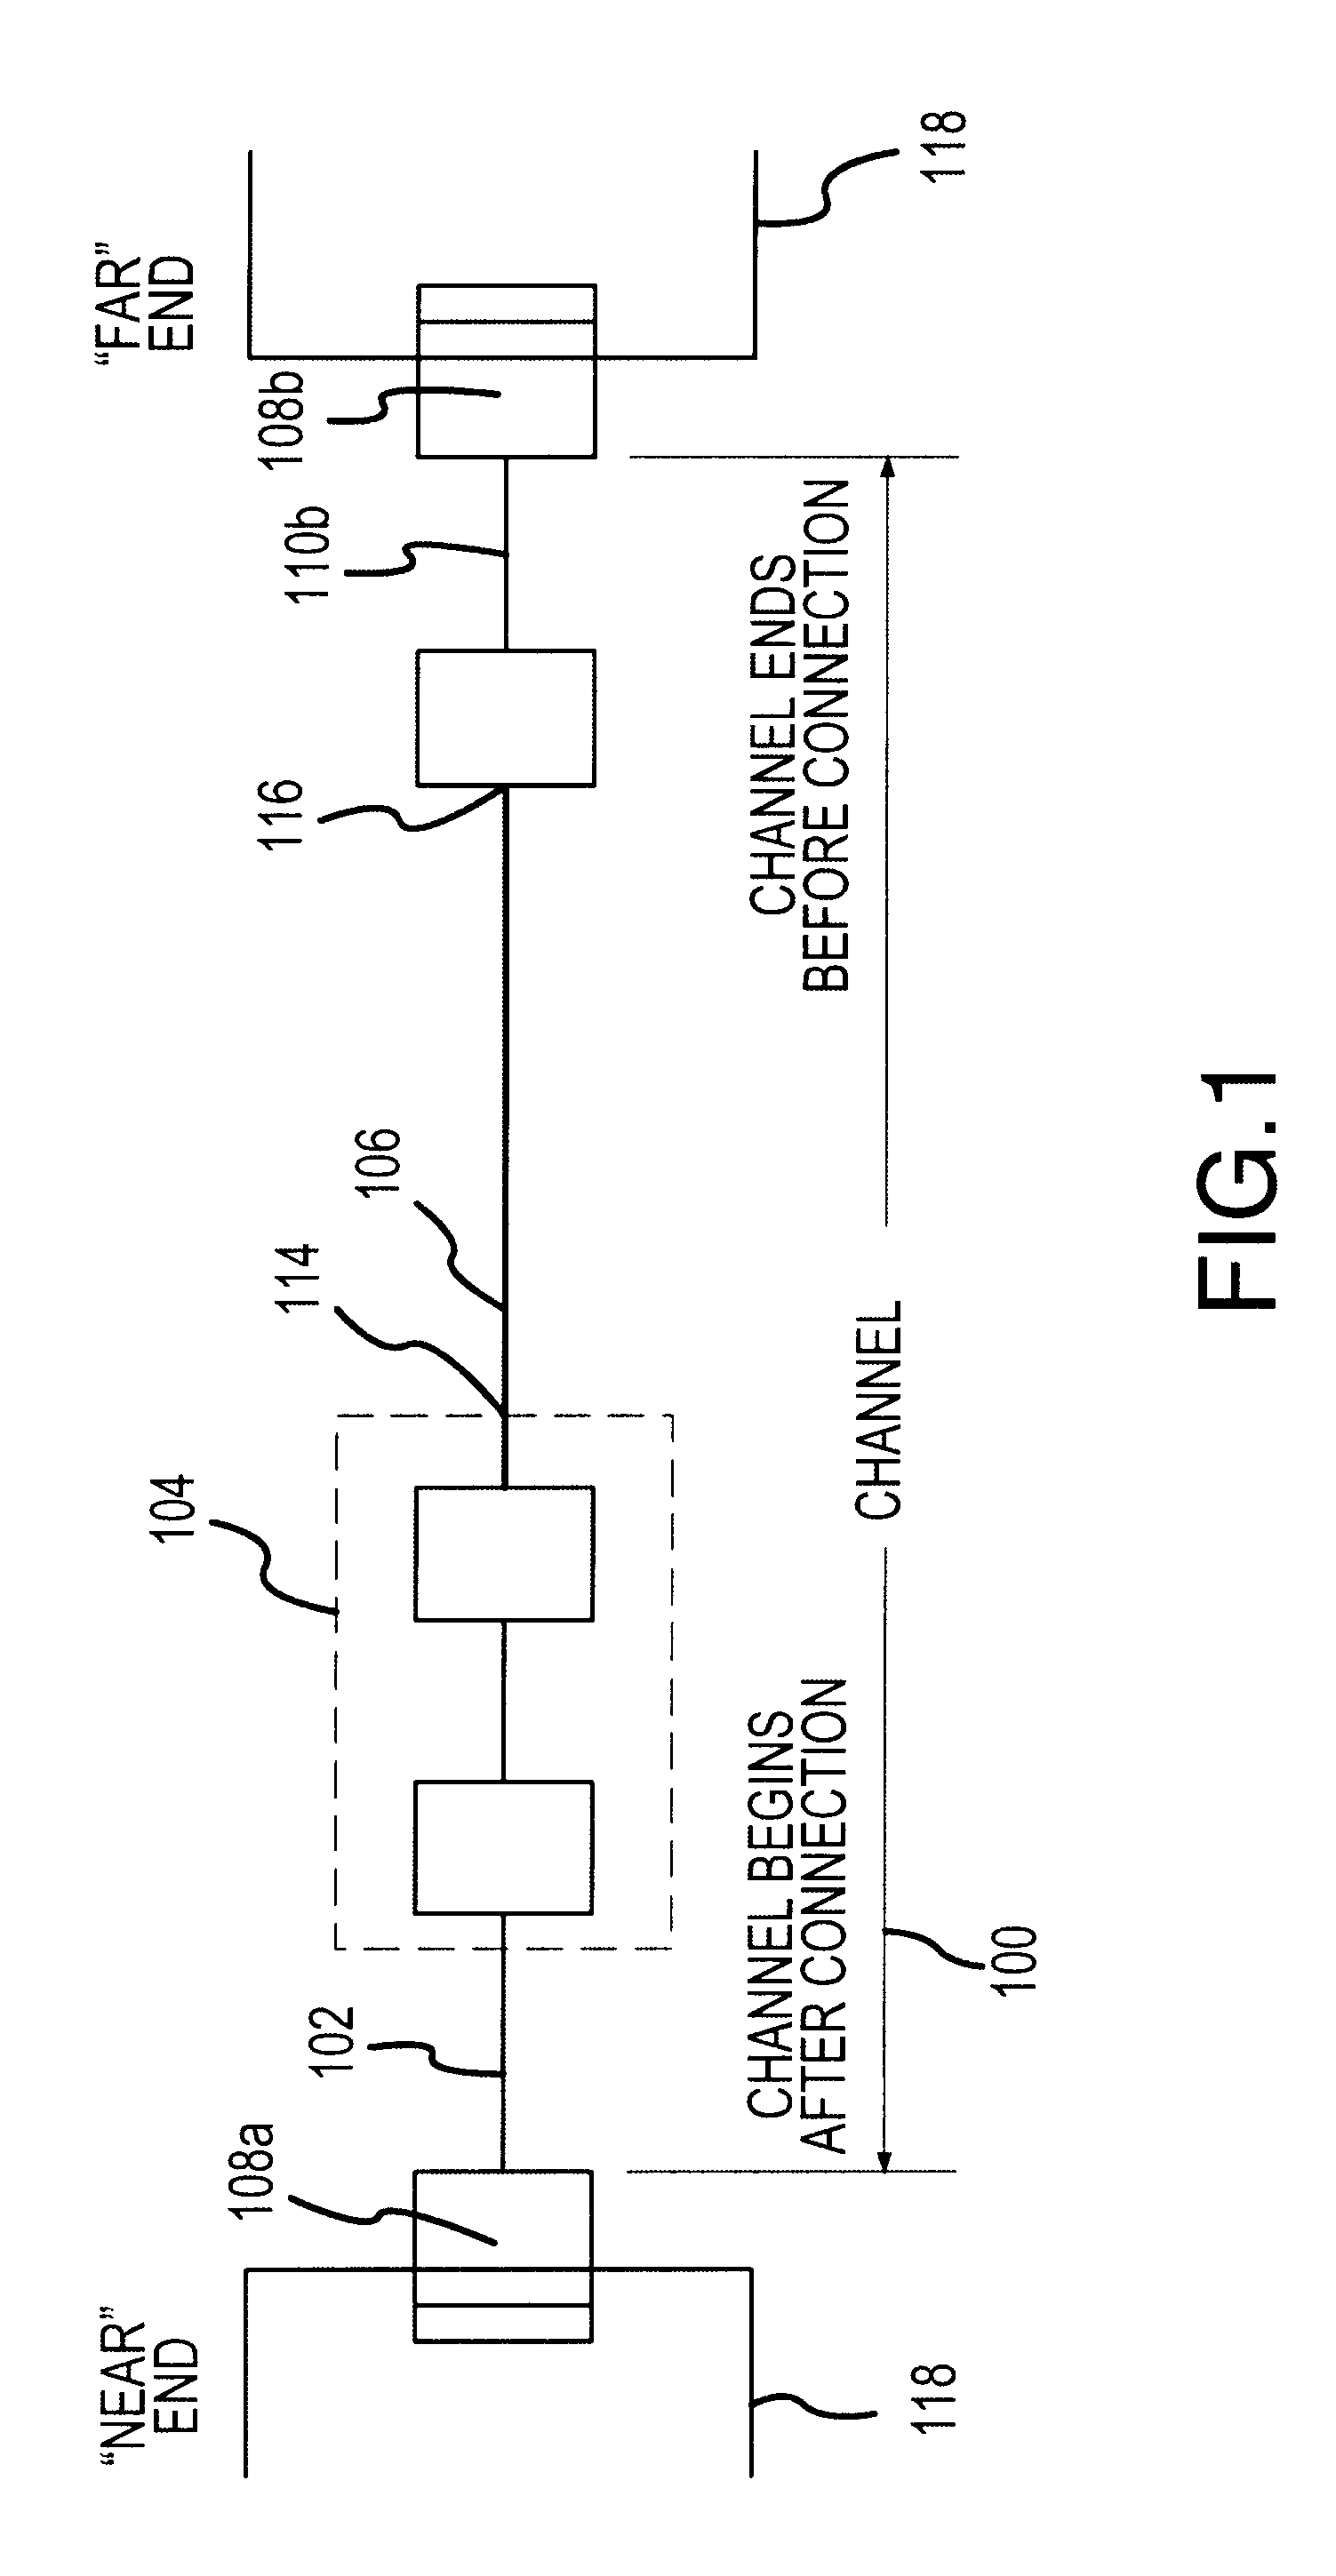 Method and apparatus for adaptive cancellation of responses in cabling